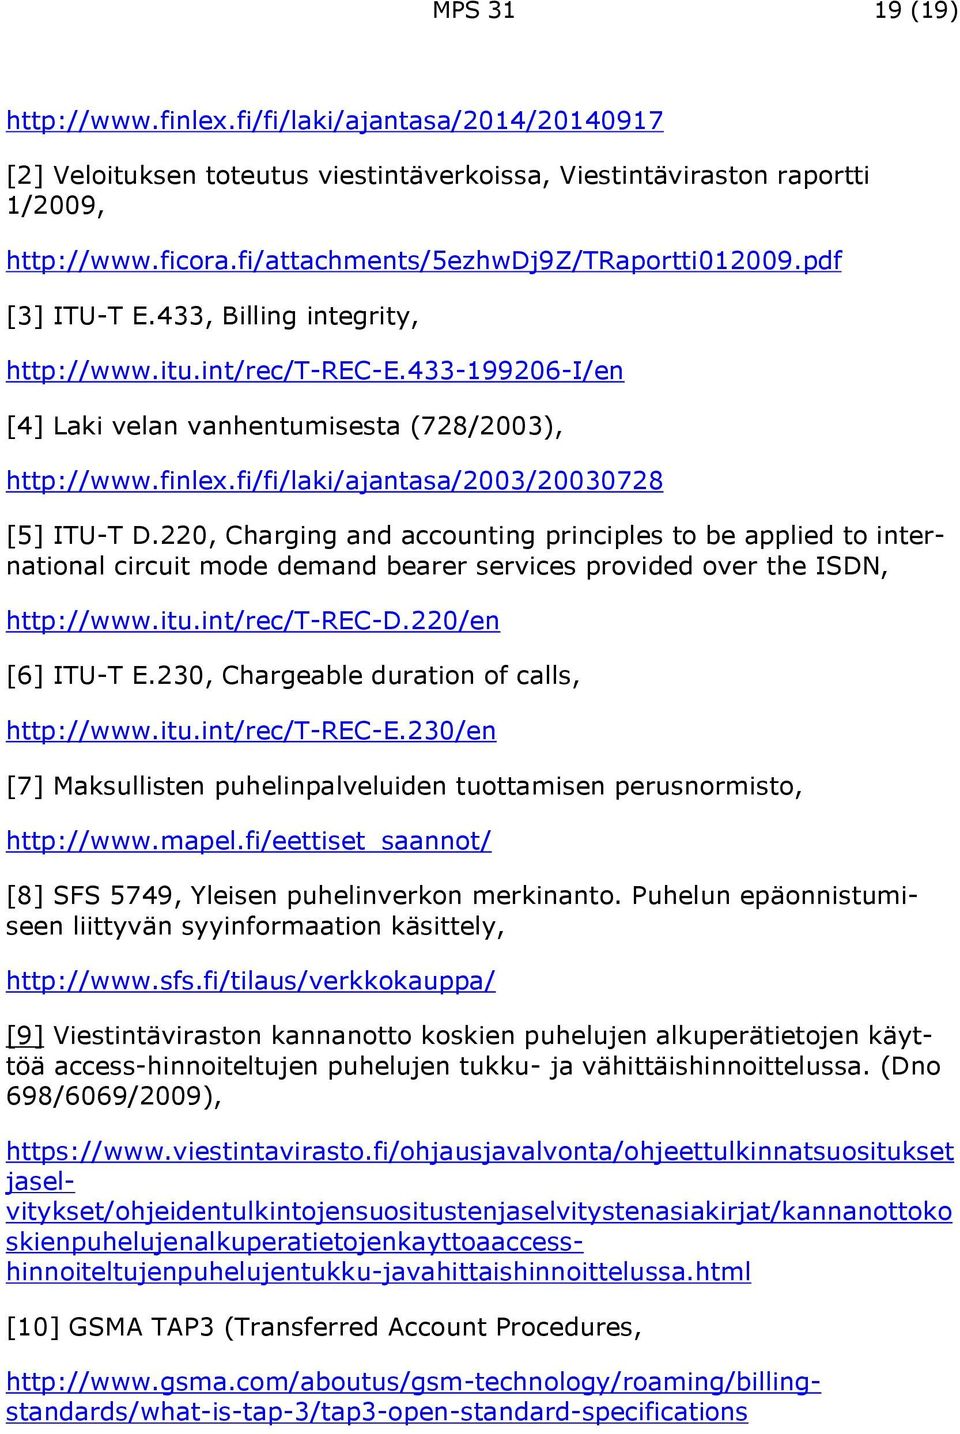 fi/fi/laki/ajantasa/2003/20030728 [5] ITU-T D.220, Charging and accounting principles to be applied to international circuit mode demand bearer services provided over the ISDN, http://www.itu.